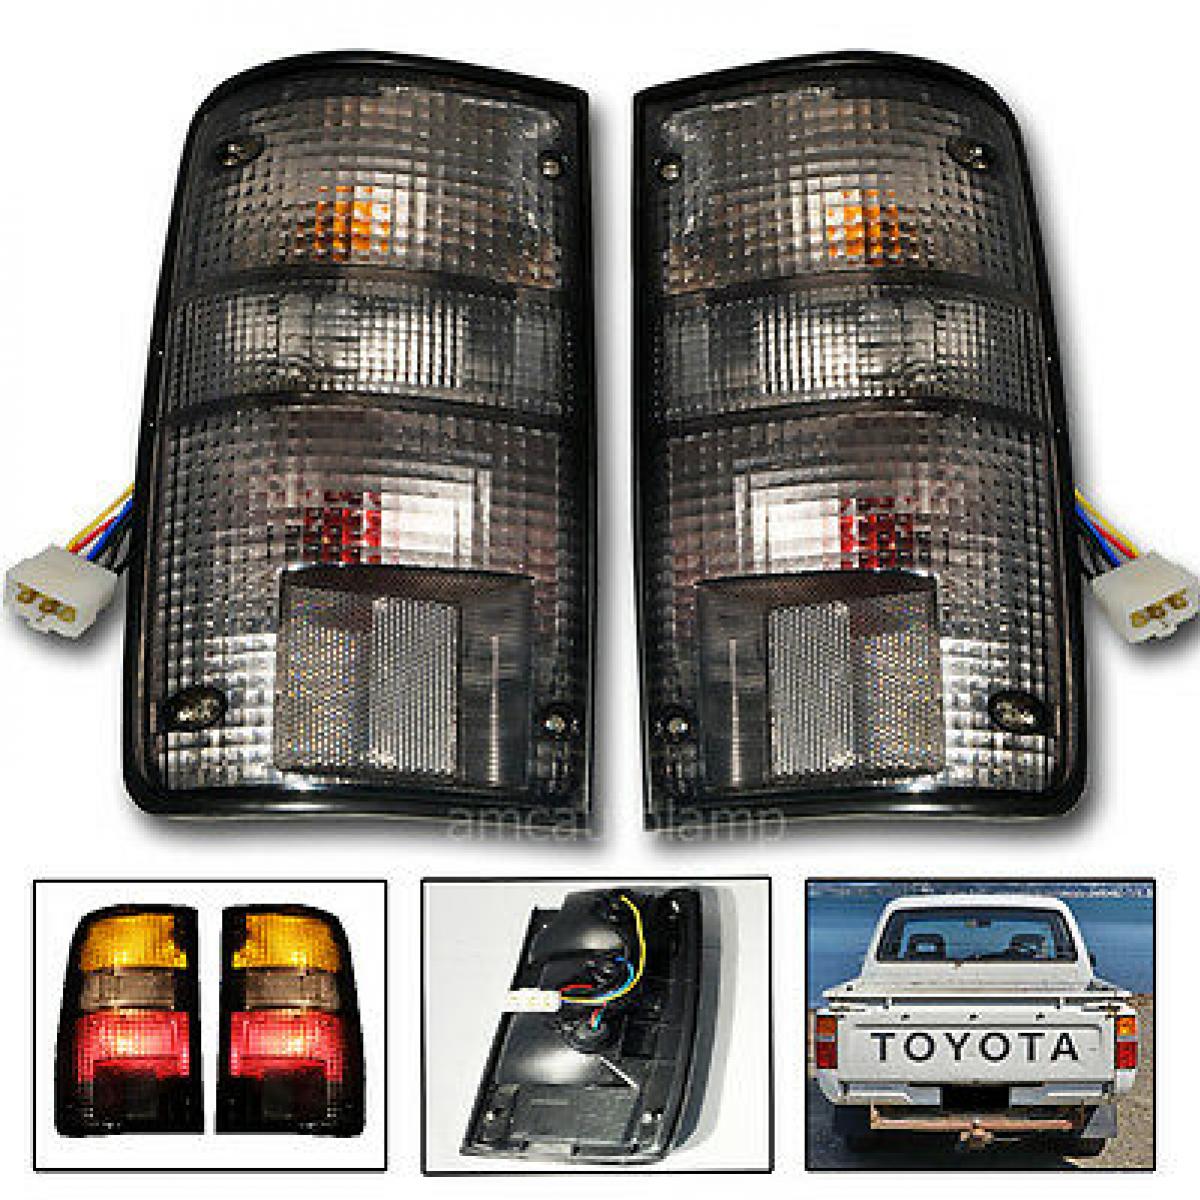 NEW TOYOTA Hilux 1994-1997 Rear tail signal lights lamp set left+right